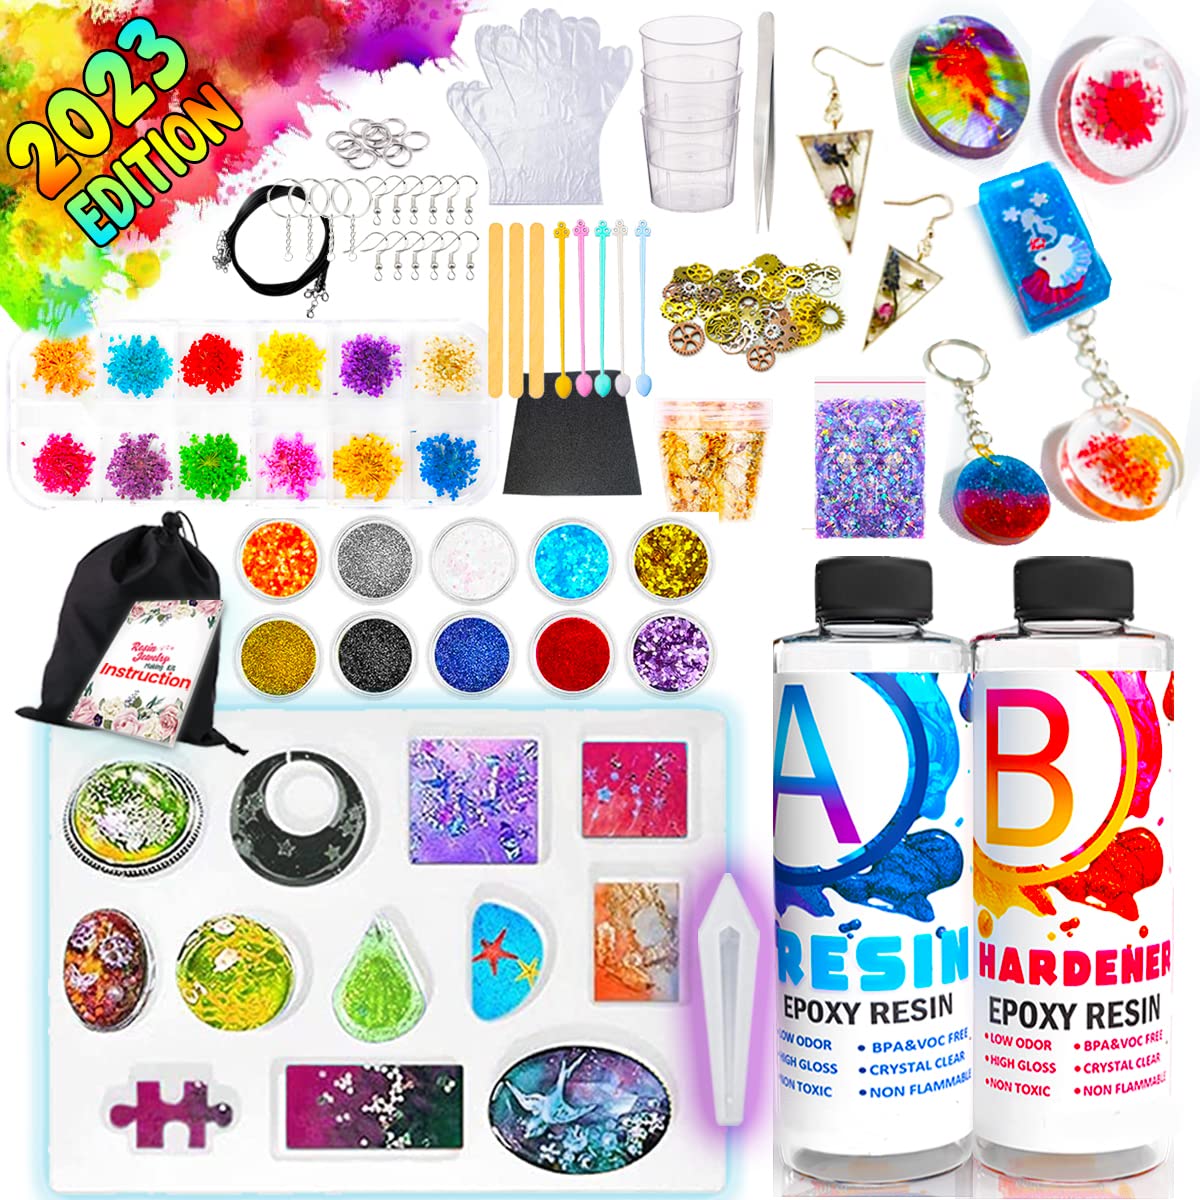 Resin Beads Galore: Unleash Your Creativity at Unbeatable Prices